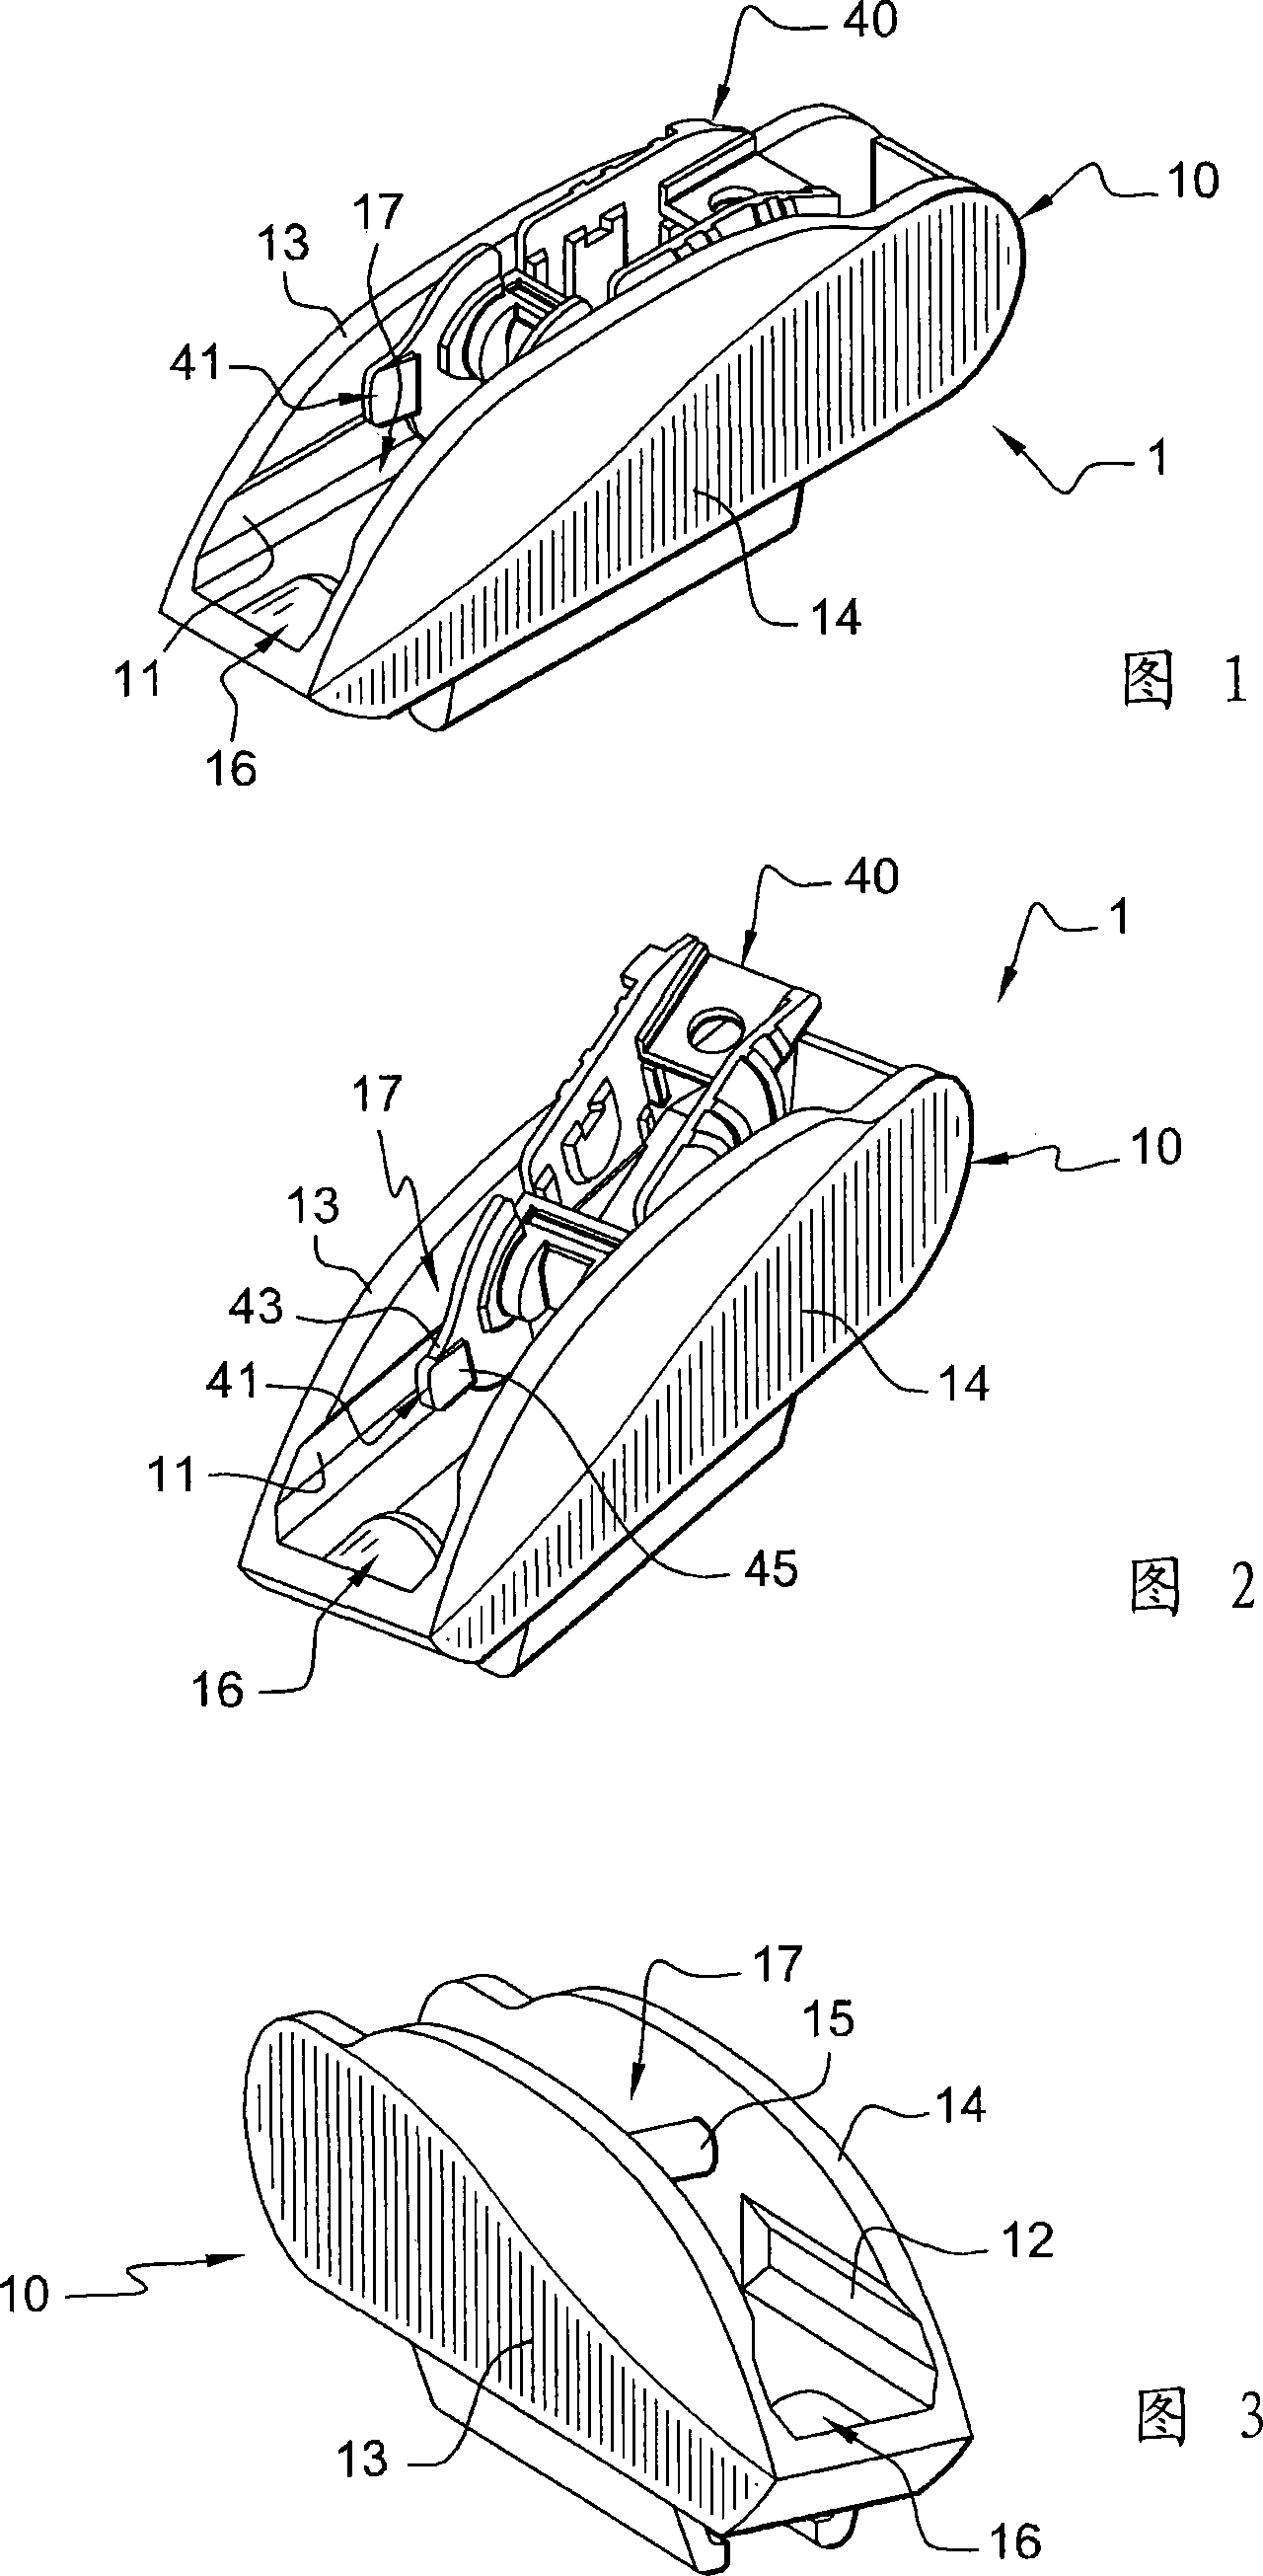 Device for attaching a windshield wiper blade on an arm